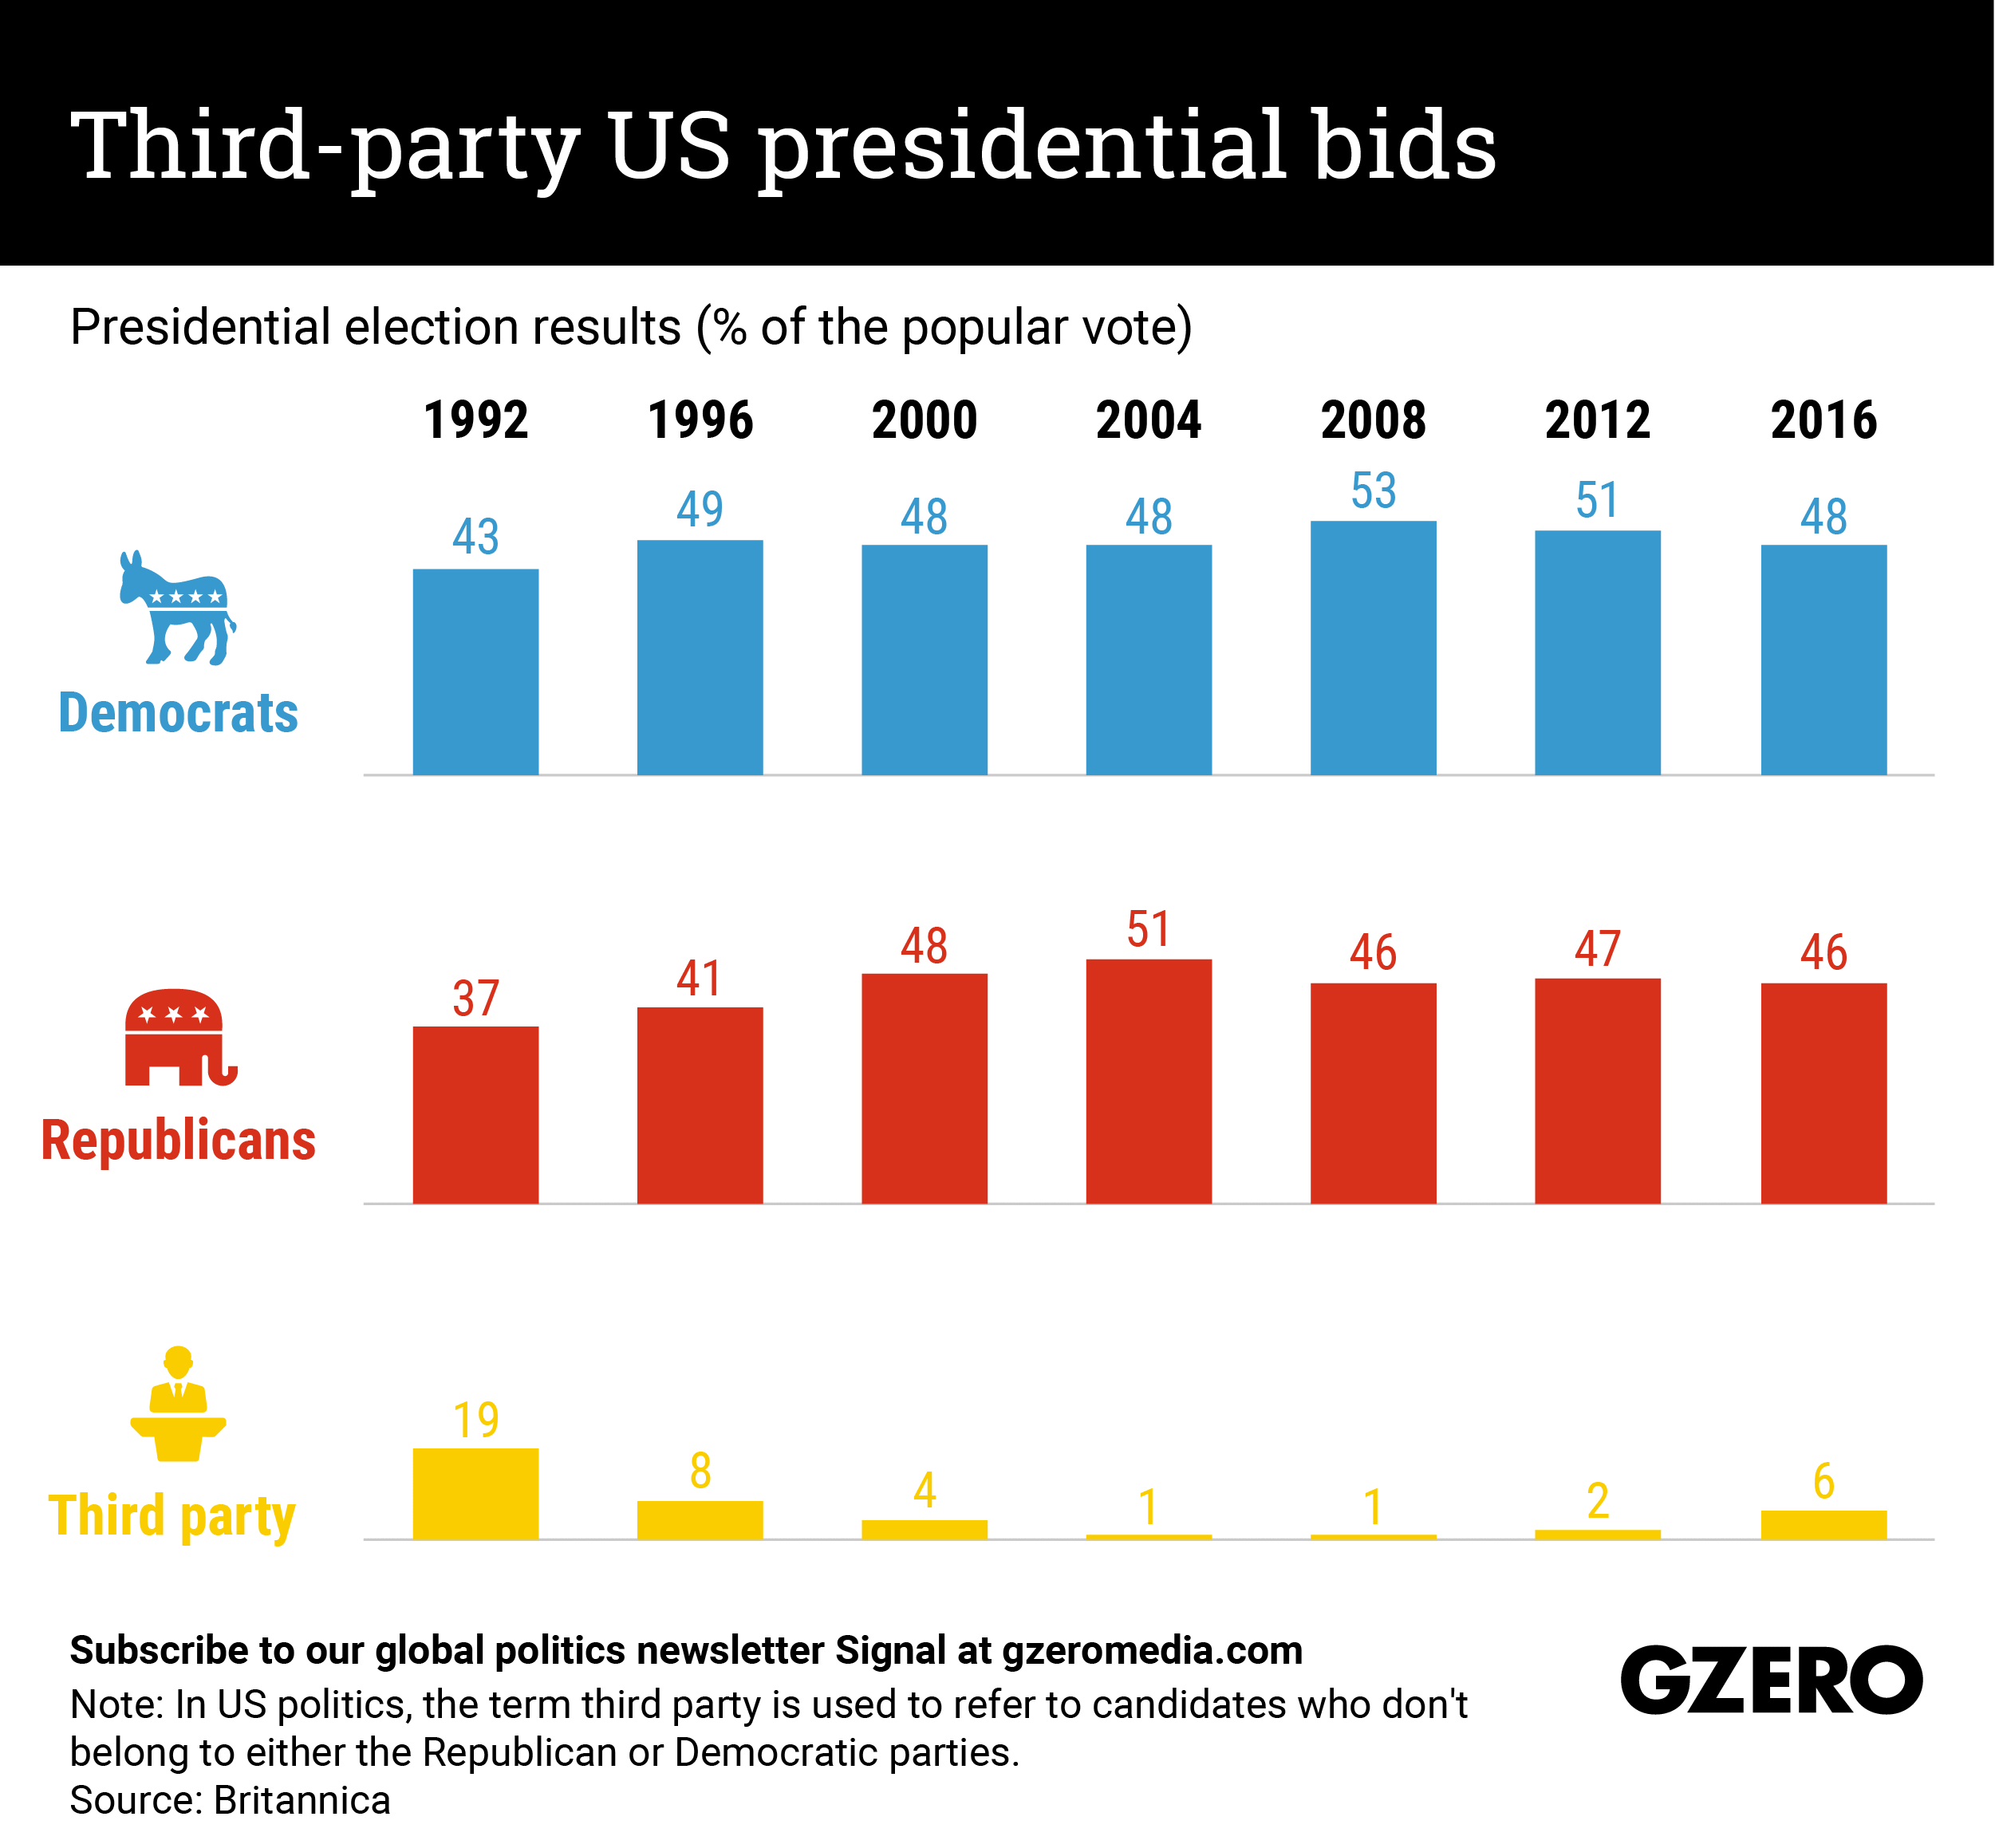 The Graphic Truth: Third-party US presidential bids